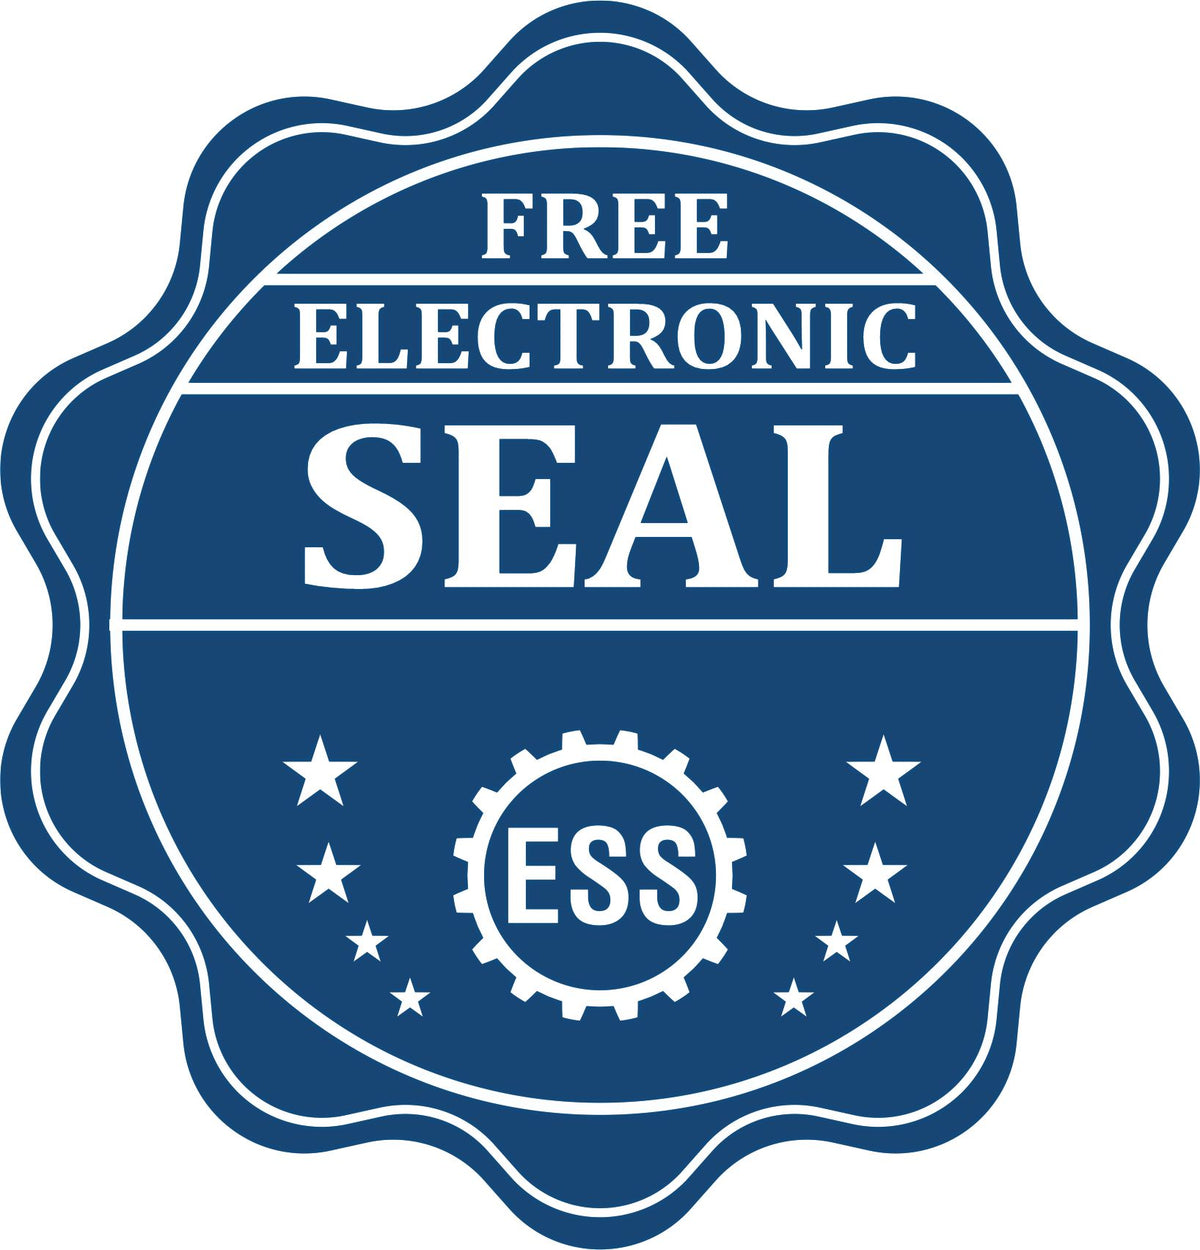 A badge showing a free electronic seal for the State of New Hampshire Soft Land Surveyor Embossing Seal with stars and the ESS gear on the emblem.